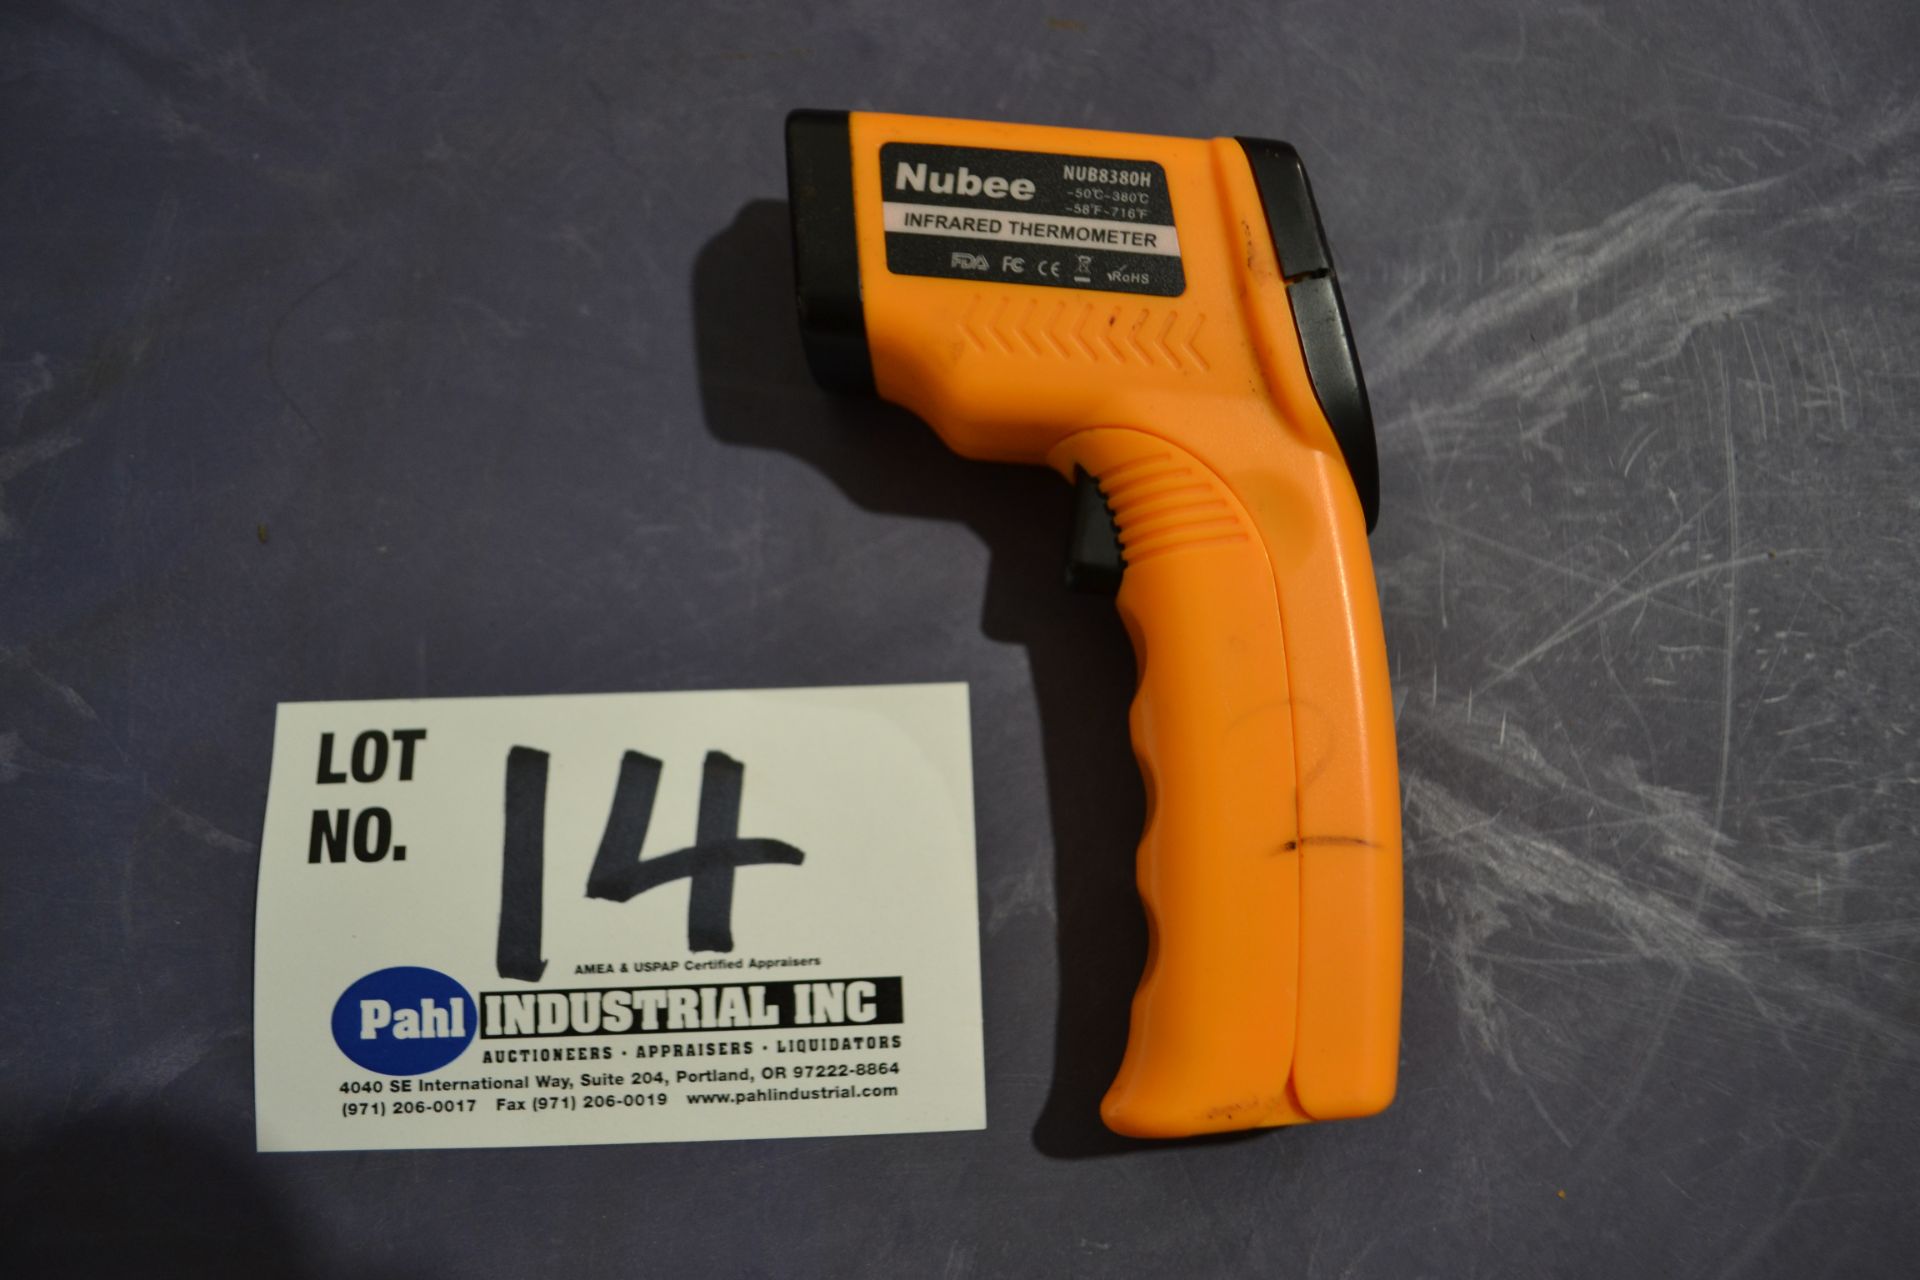 Nubee NUB8380H Infrared Thermometer - Image 2 of 2